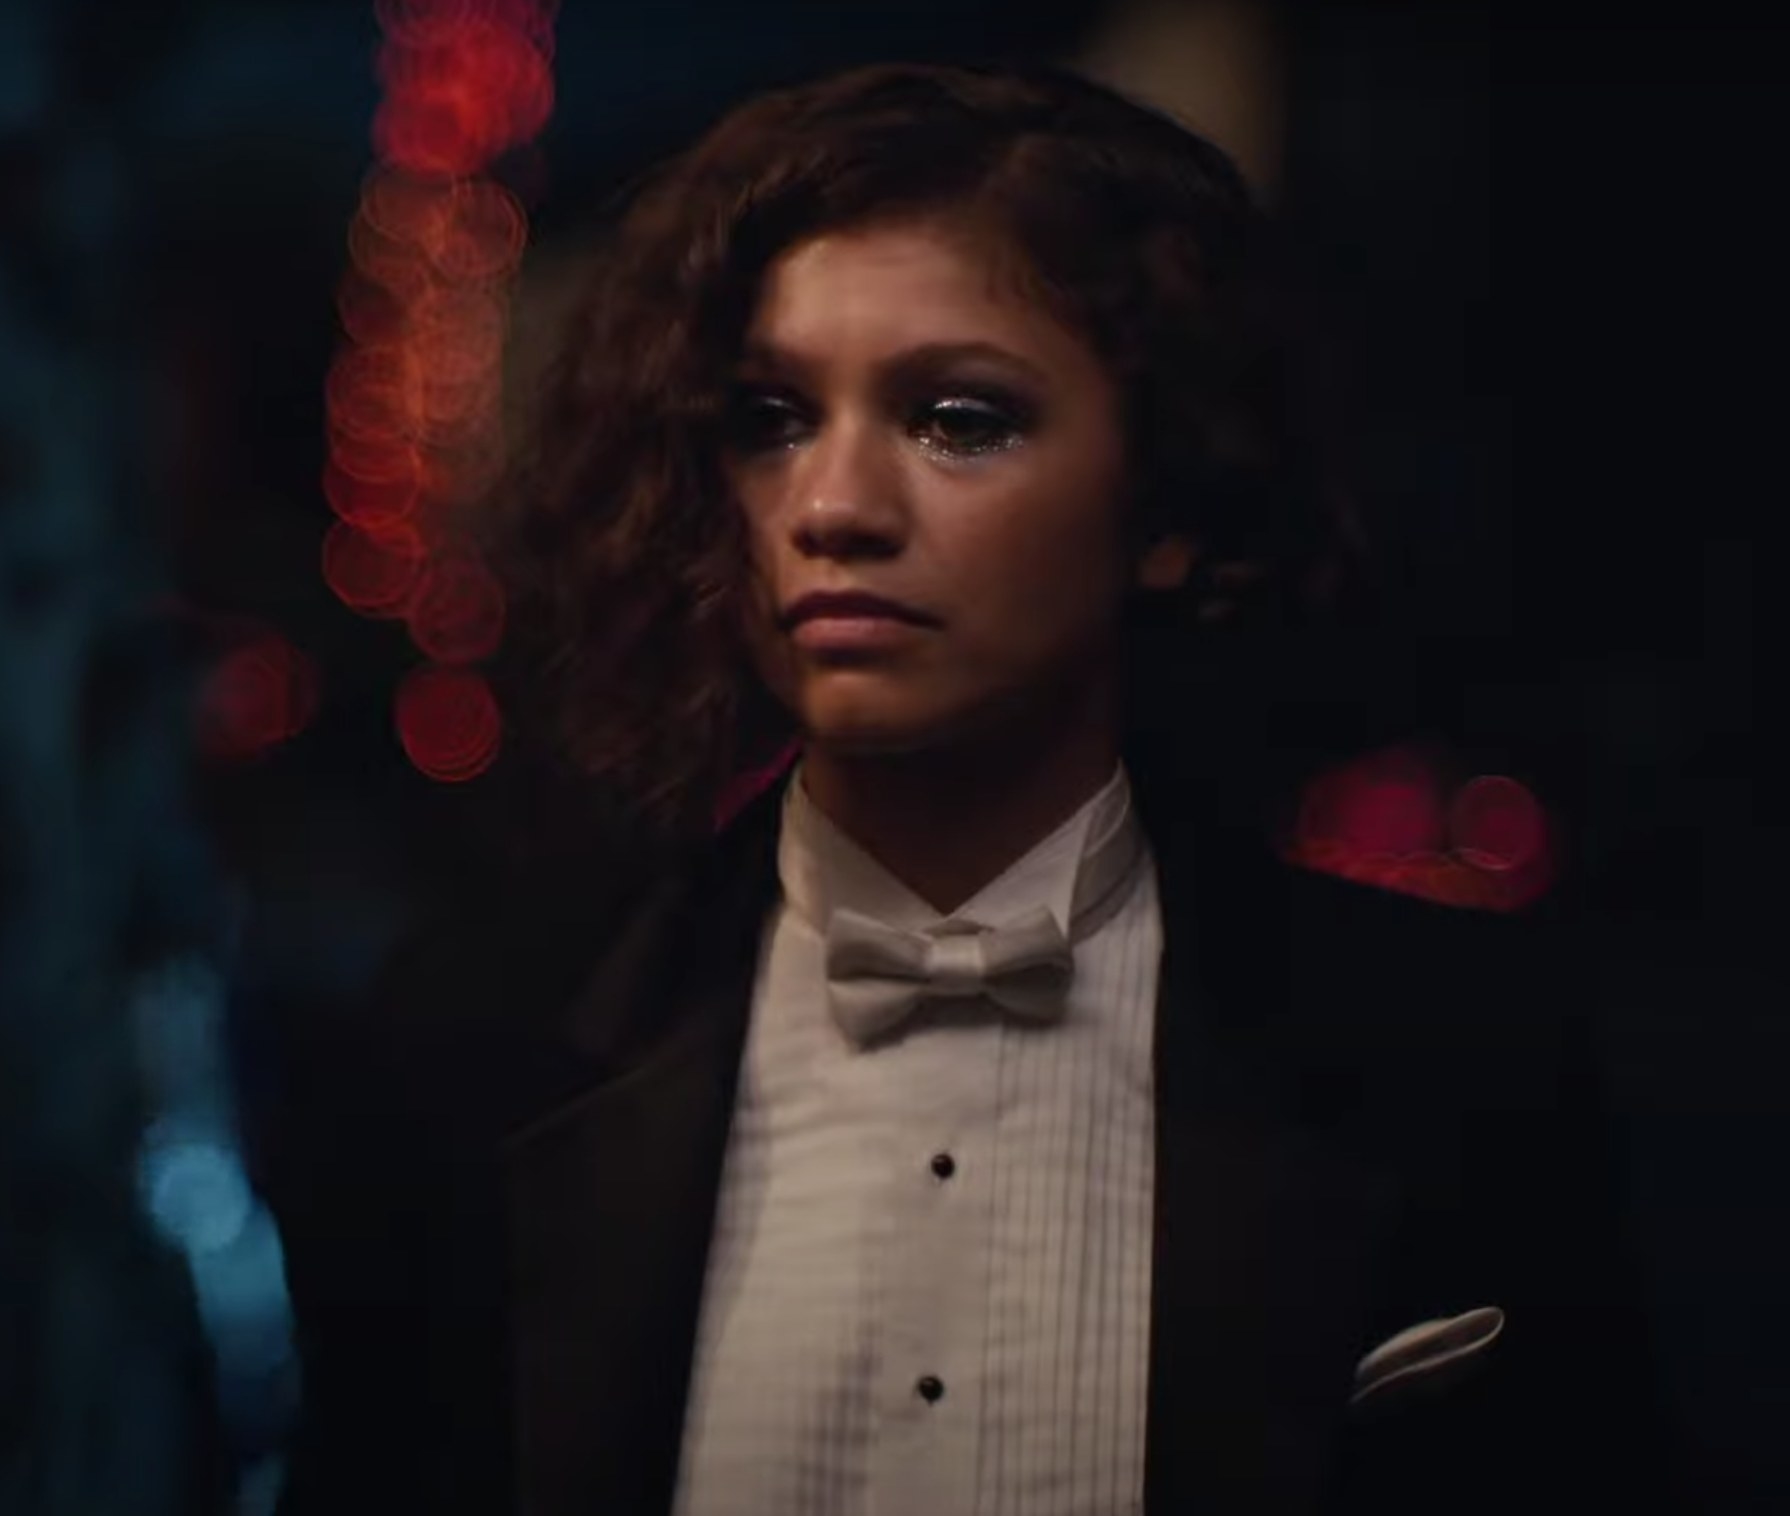 Rue in tuxedo and sparkly eye makeup